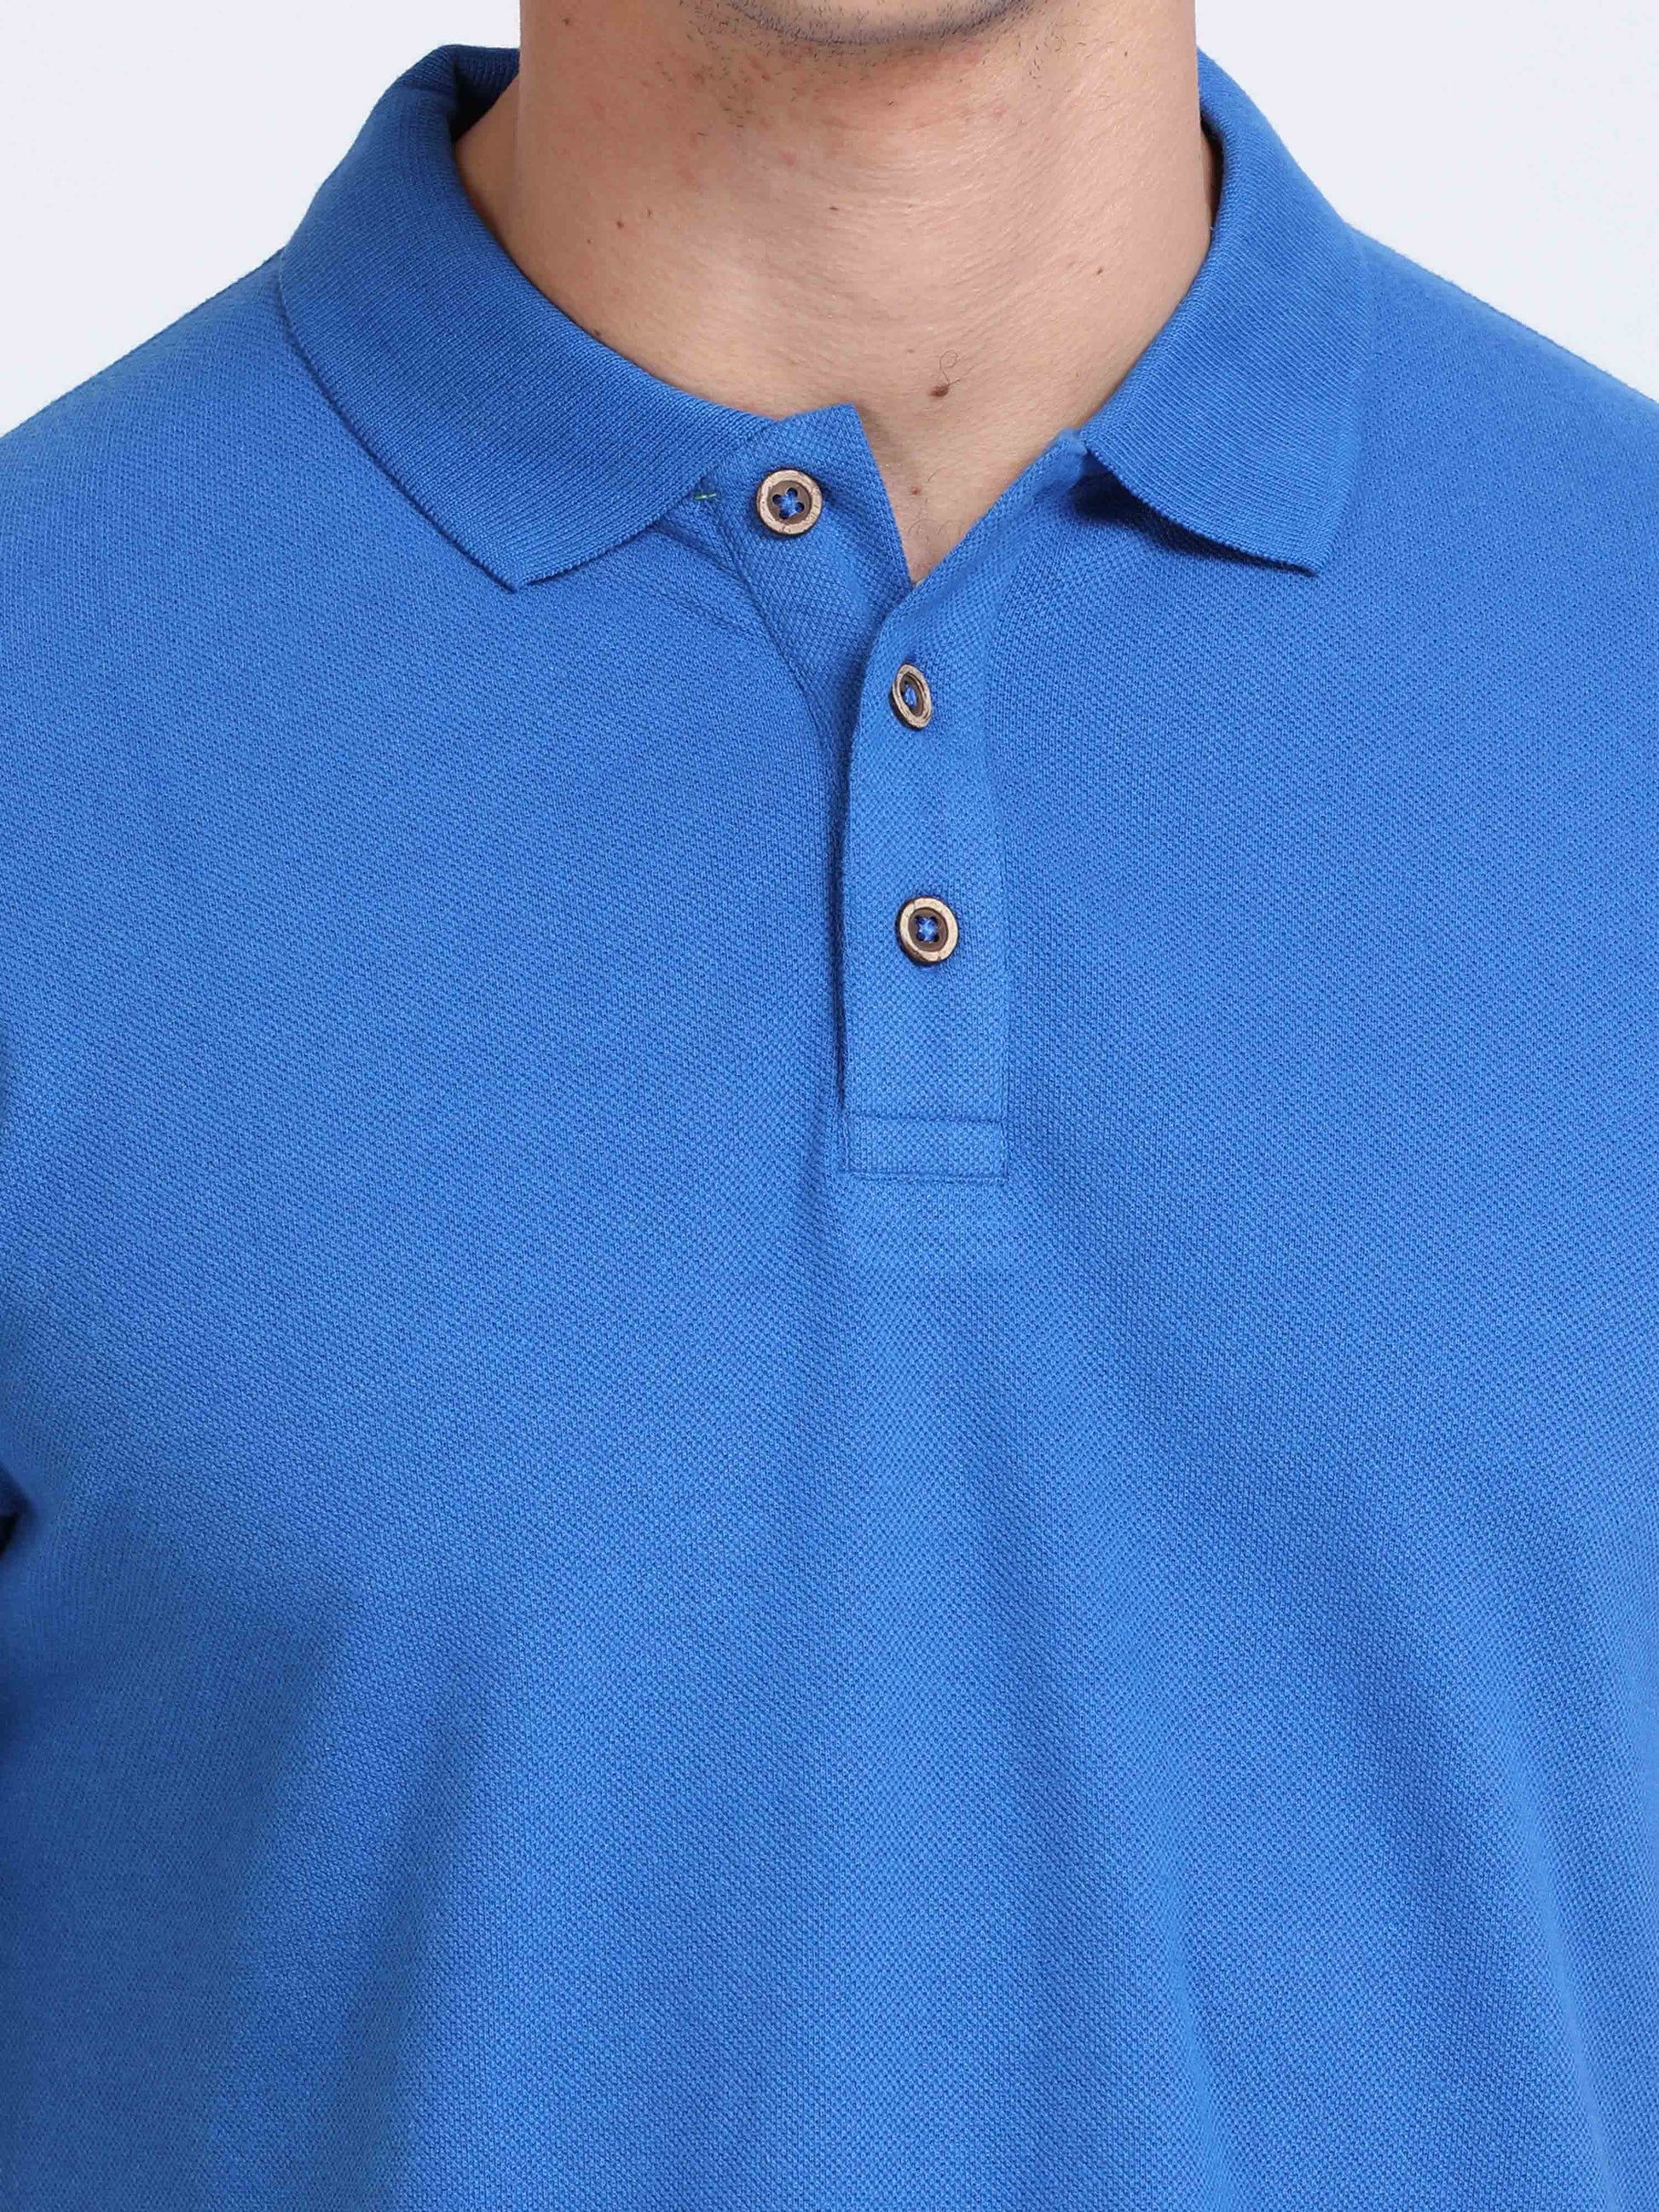  Sustainable Royal Blue Polo T Shirt